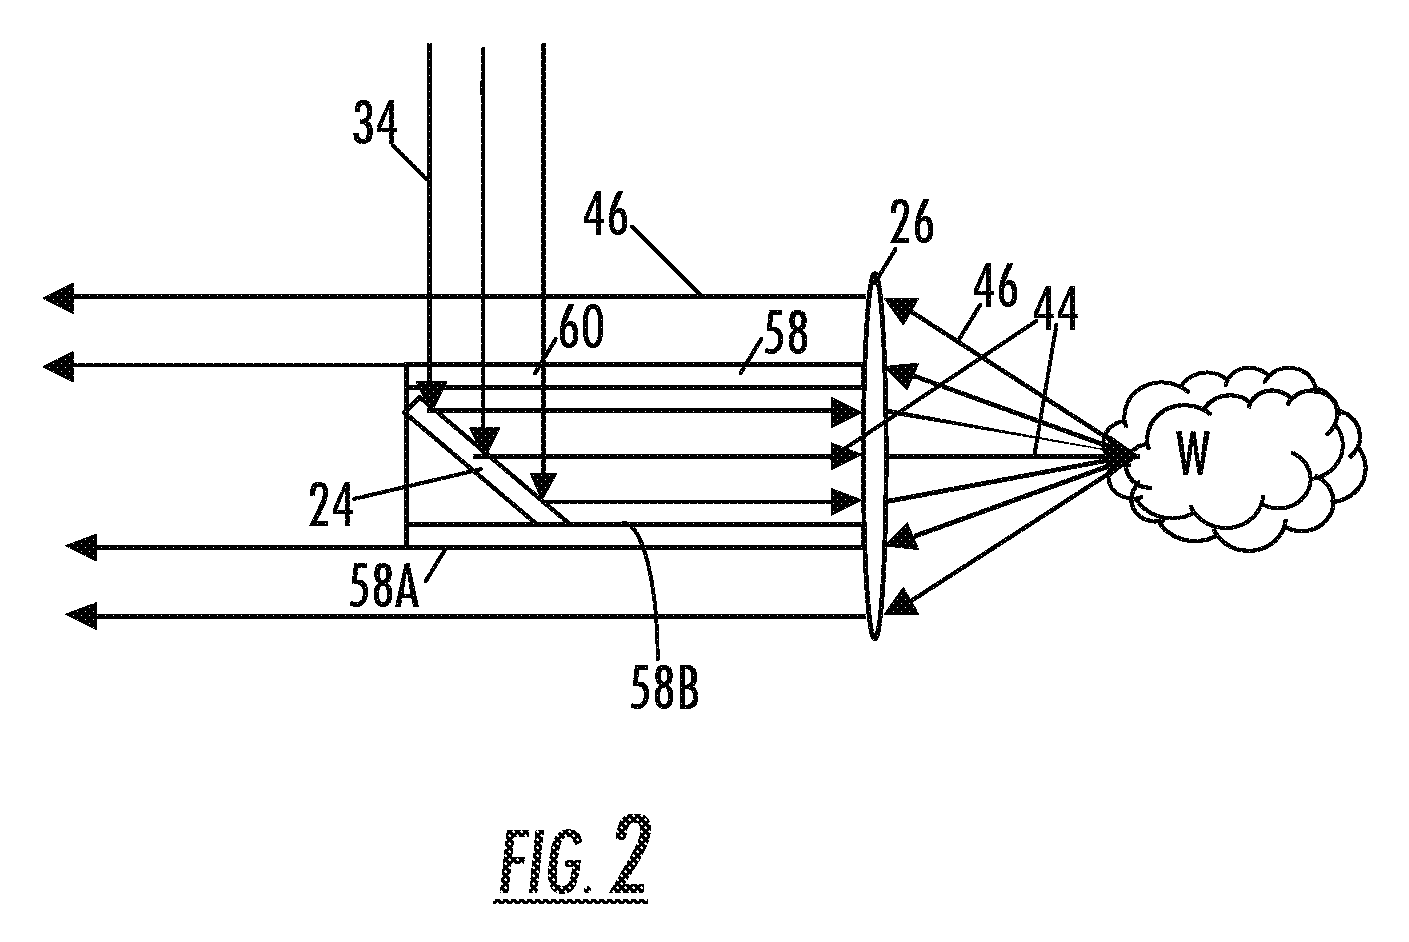 Self-contained multivariate optical computing and analysis systems